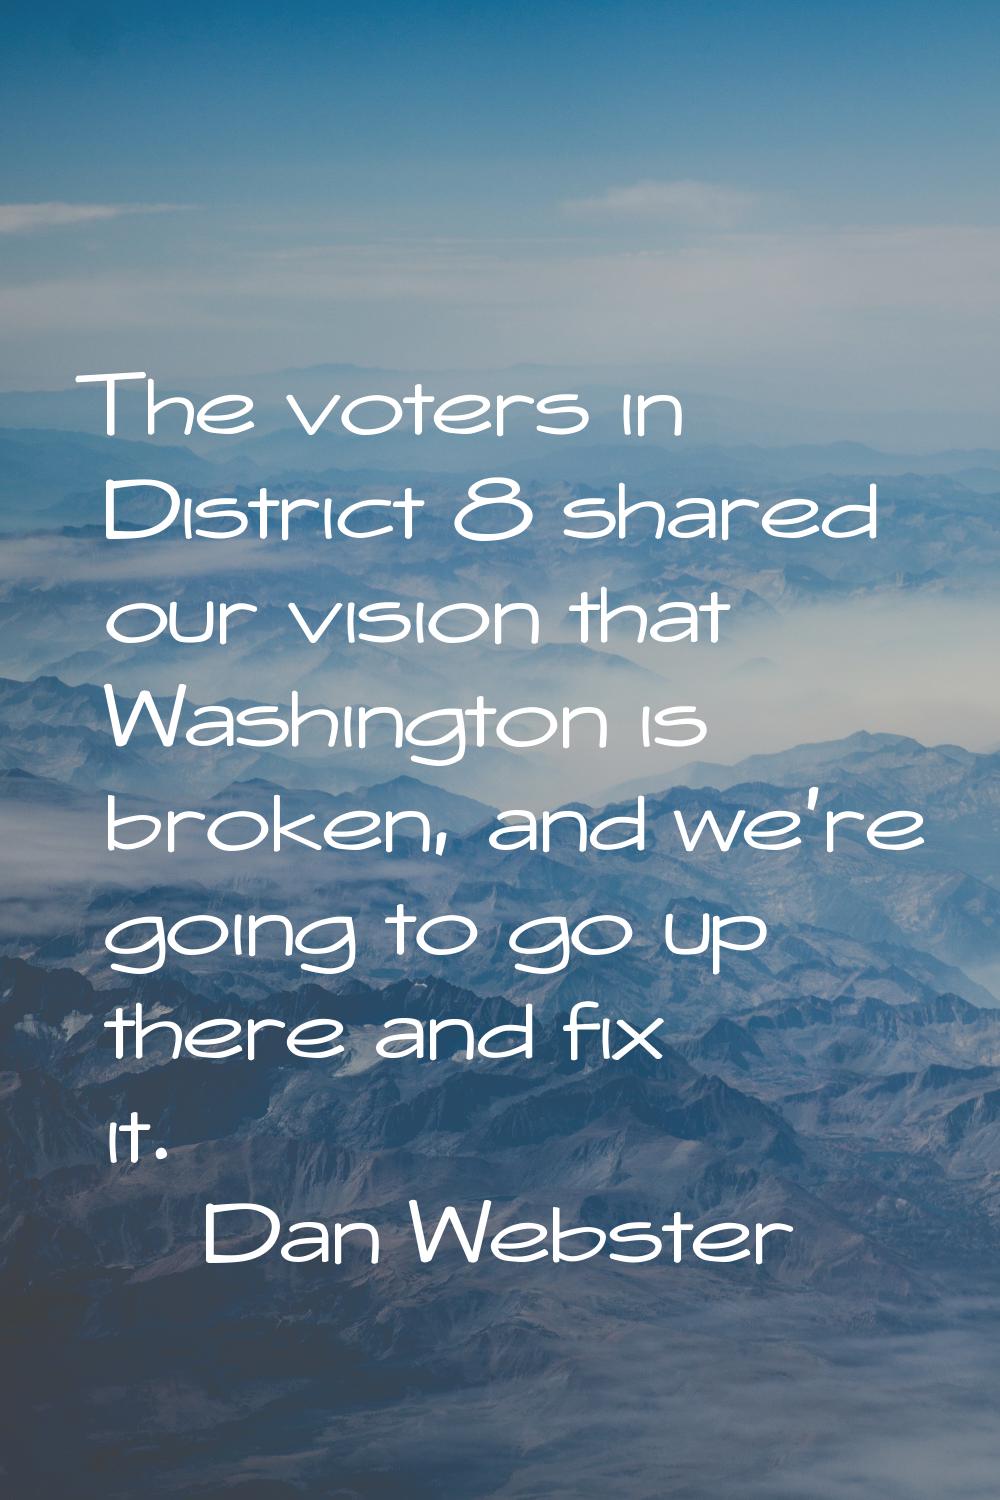 The voters in District 8 shared our vision that Washington is broken, and we're going to go up ther